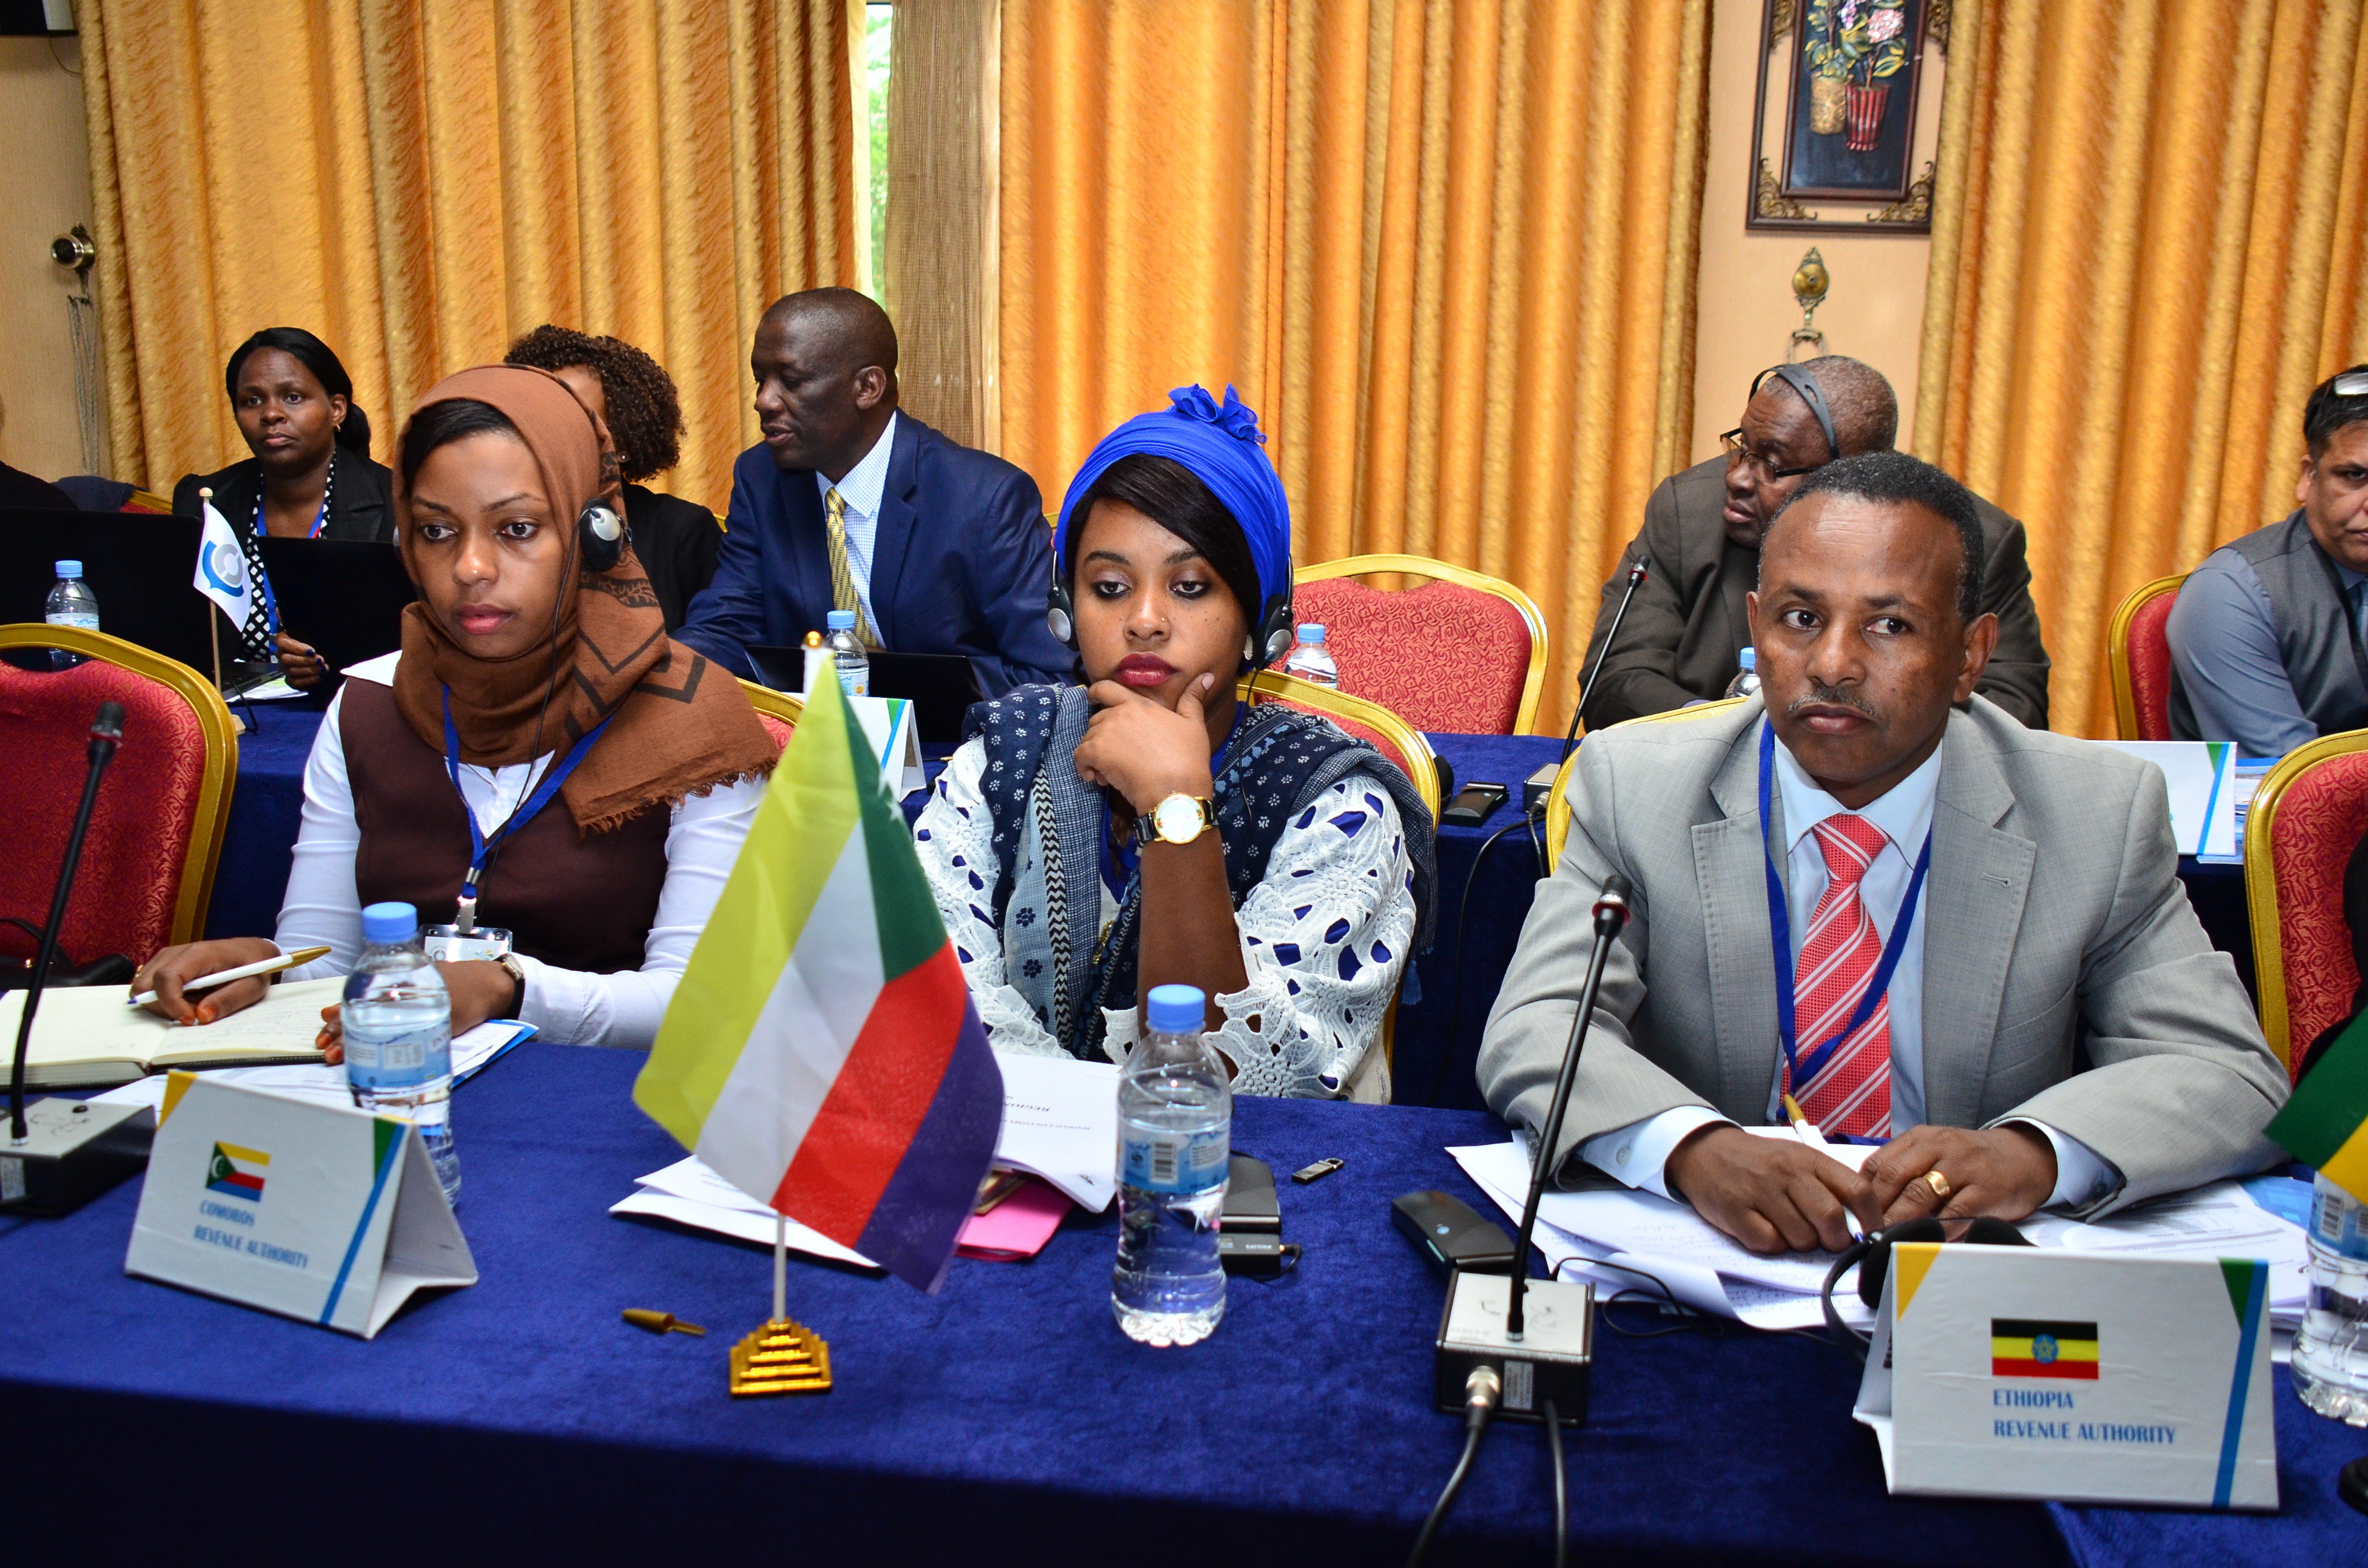 Participants during the 28th Regional Steering Group meeting in Kigali. The meeting attracted delegates from more than 20 countries. (Diane Mushimiyimana)